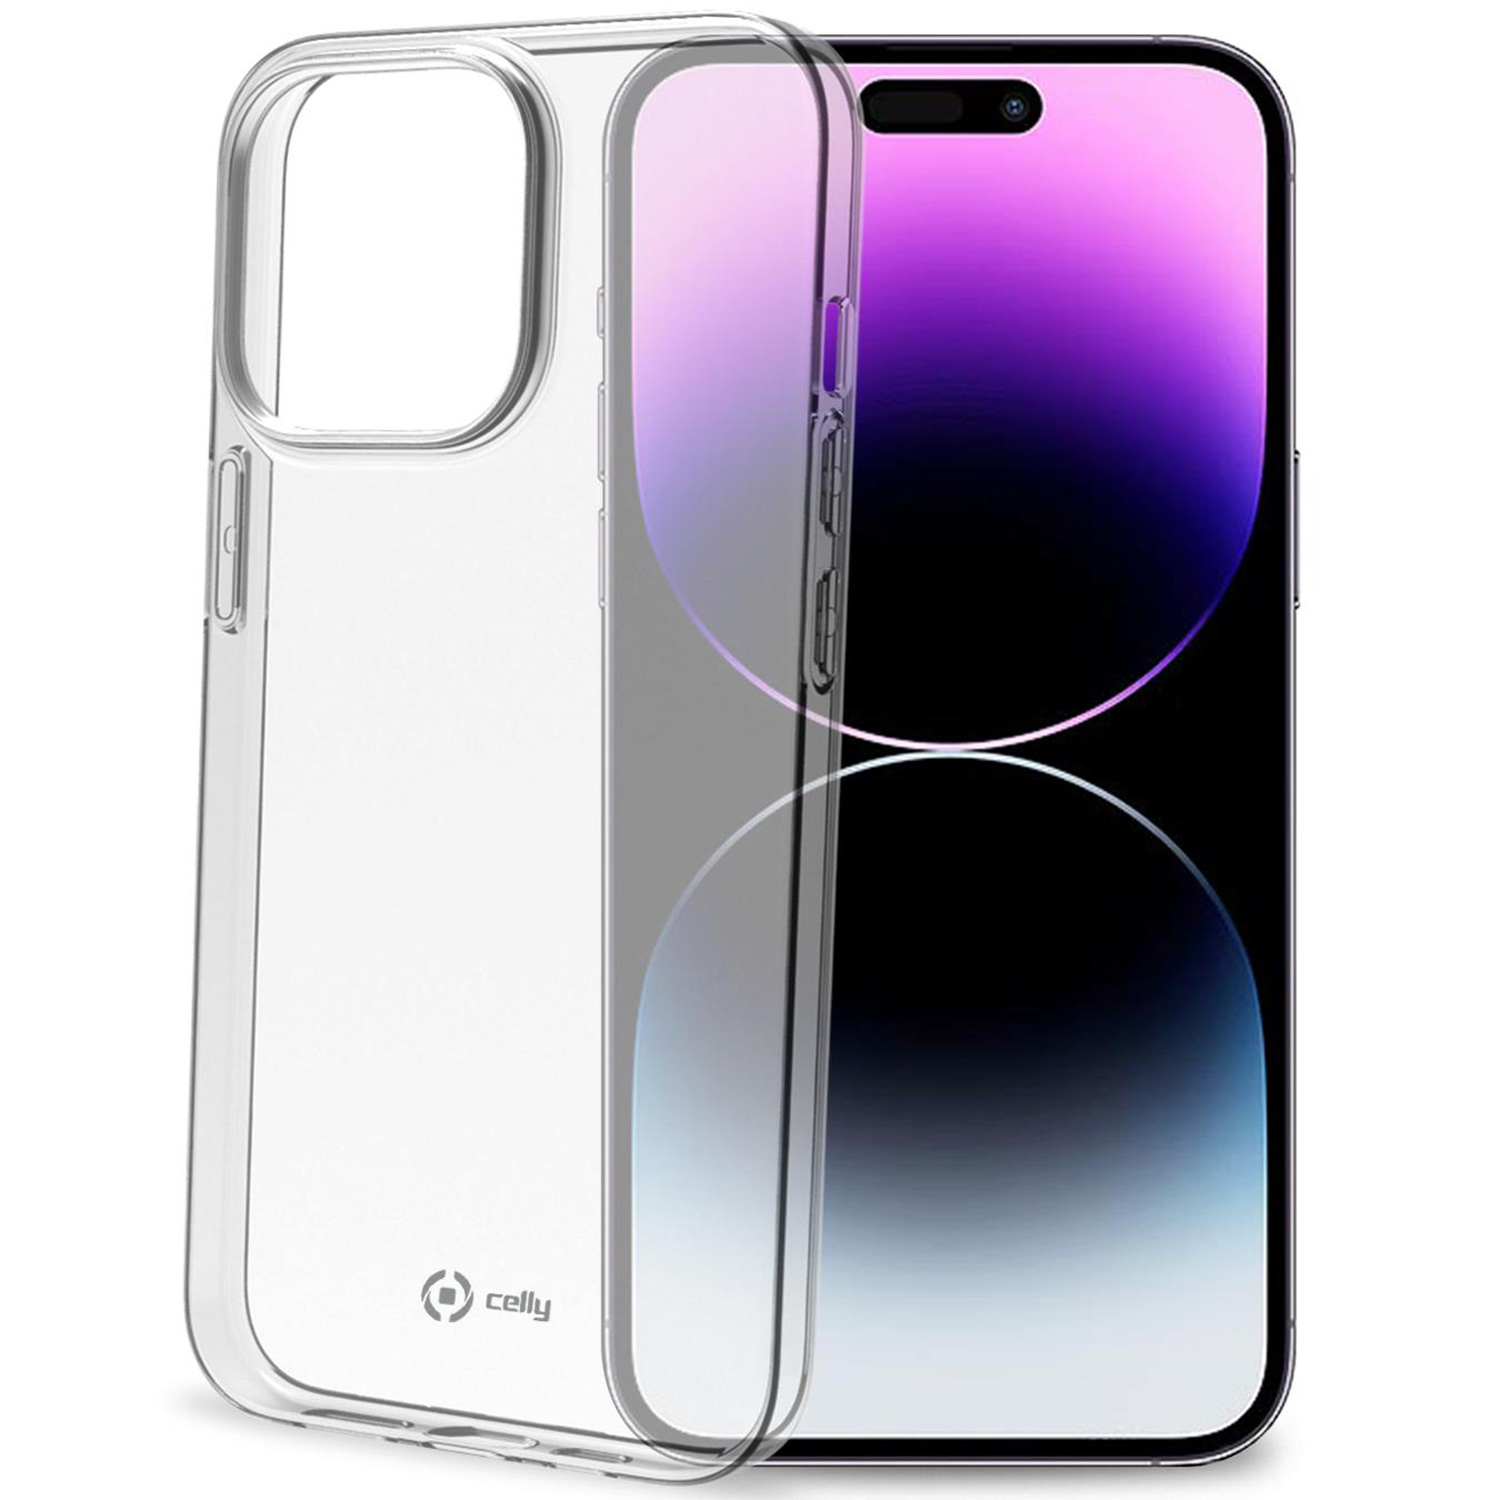 Apple, Backcover, Max, iPhone CELLY transparent 14 Pro 256446,